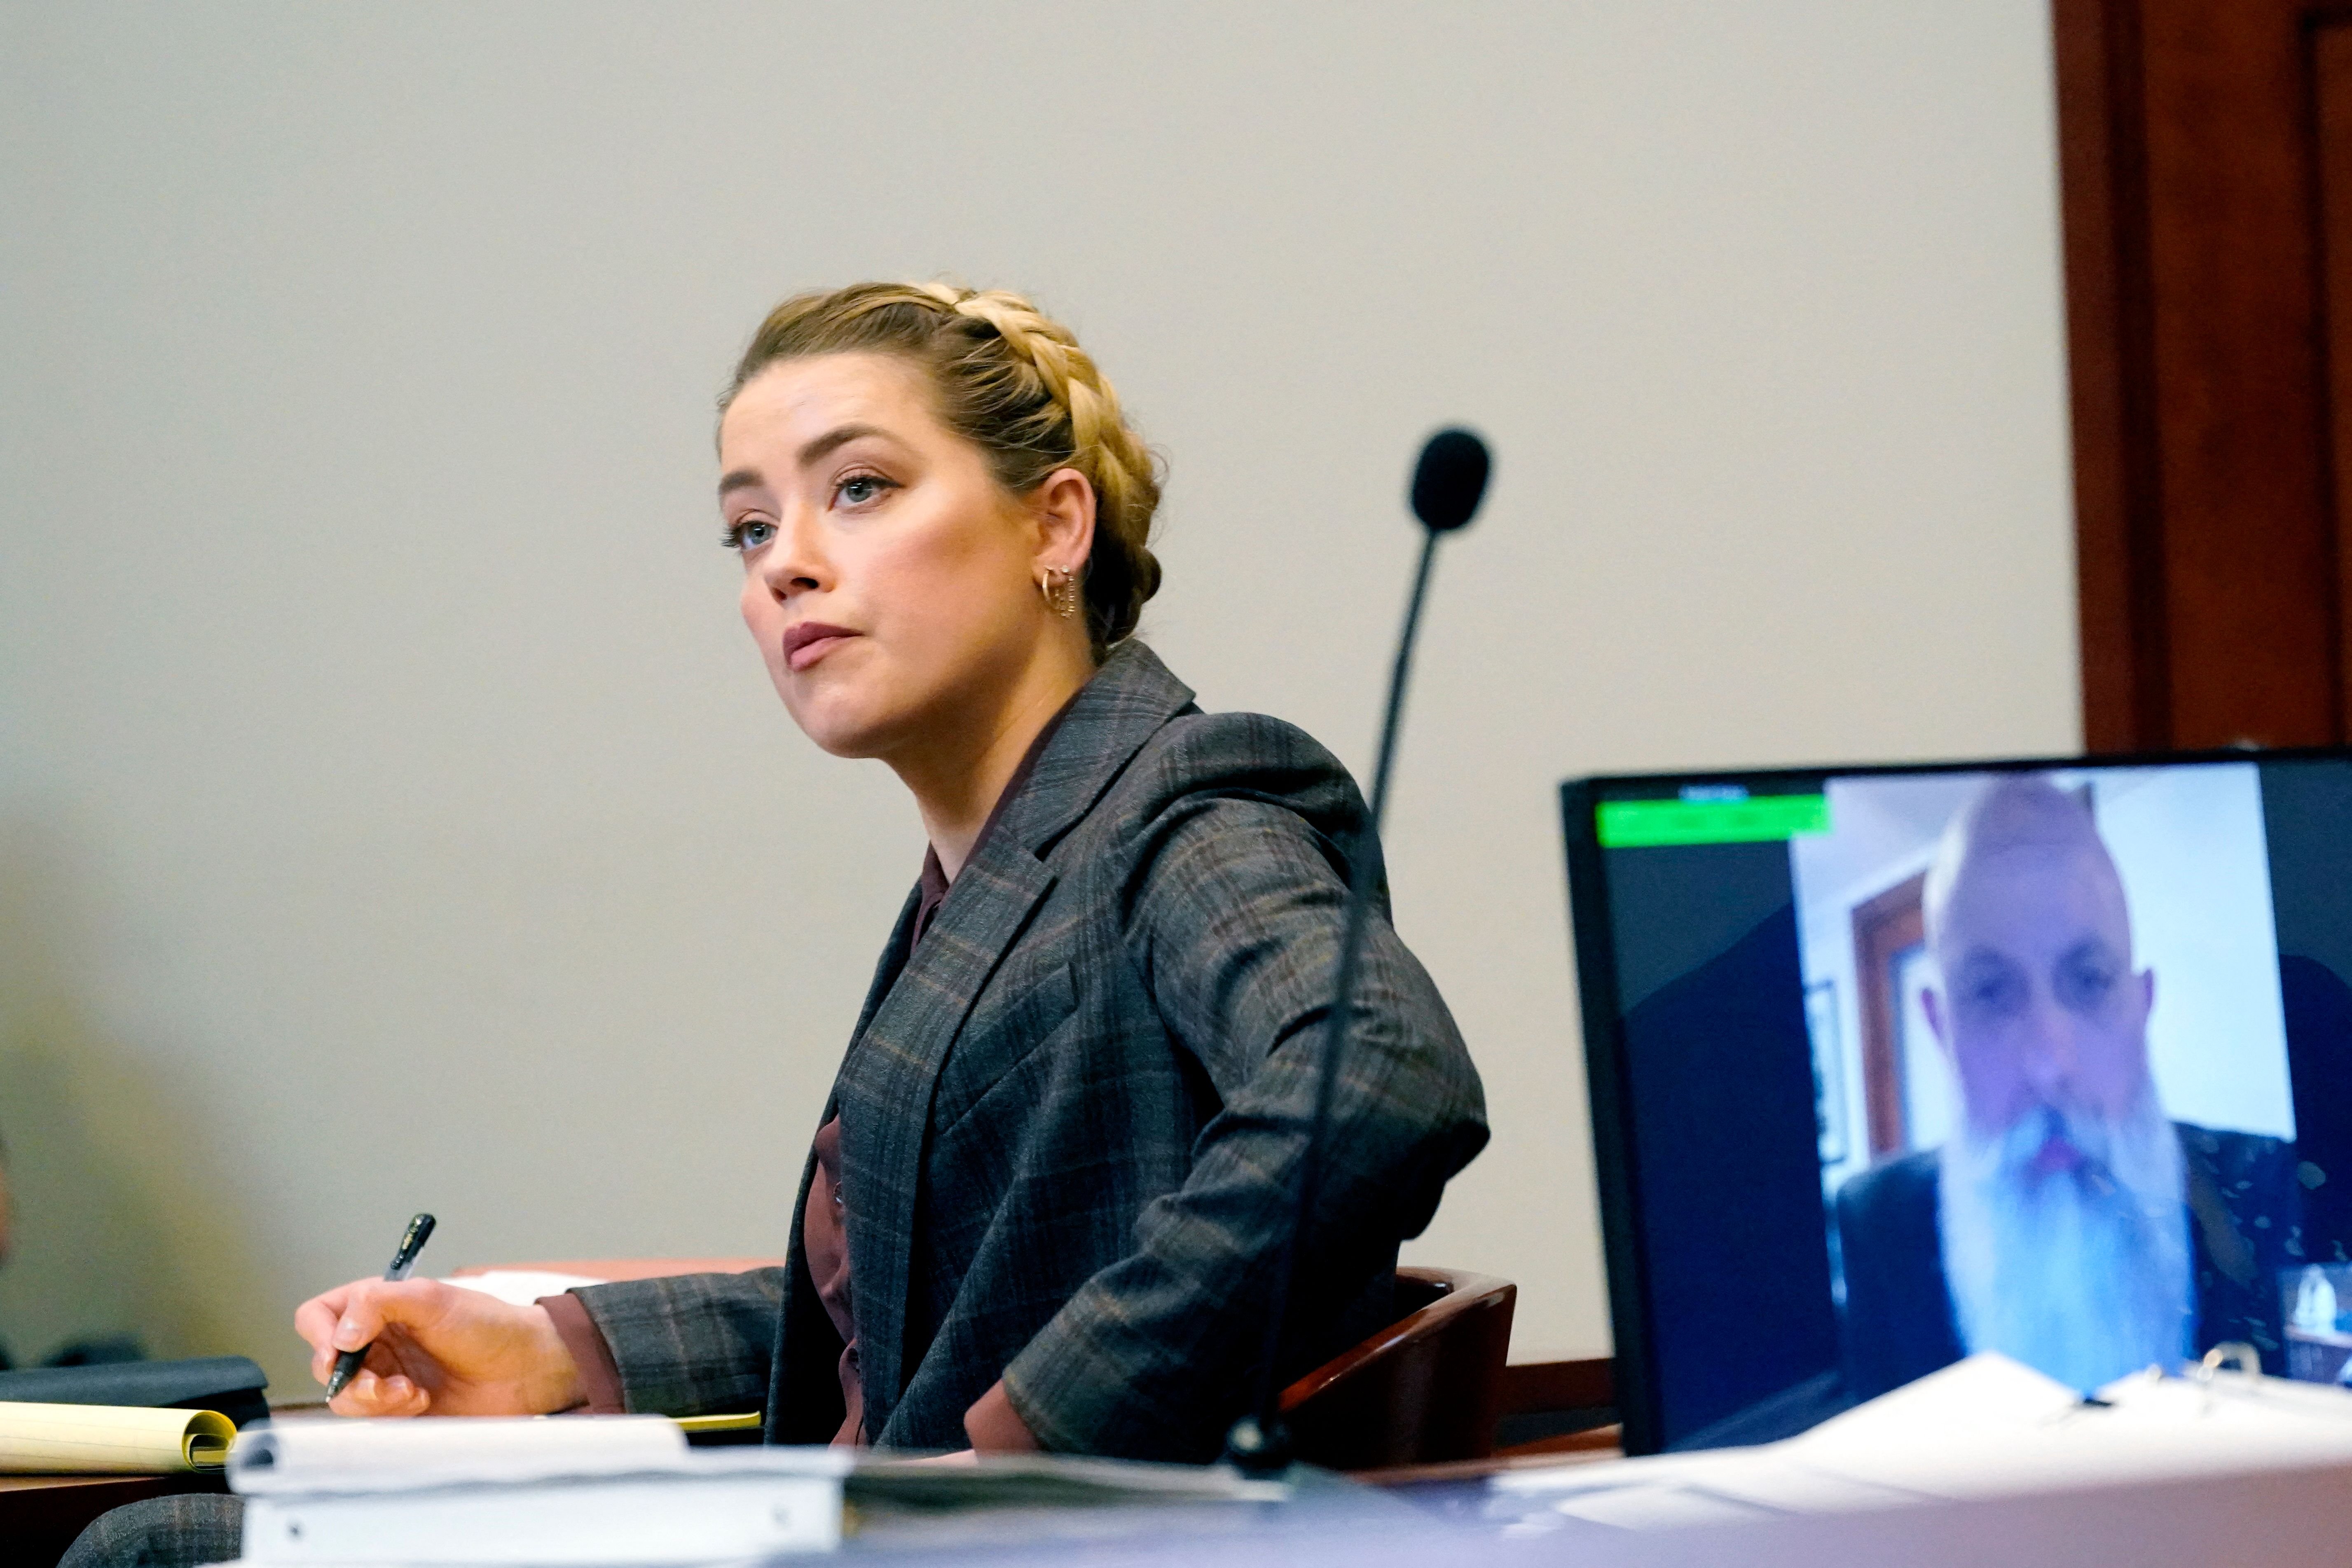 Amber Heard listening as Travis McGivern, a bodyguard for Johnny Depp, testifies remotely (R) in the courtroom at the Fairfax County Circuit Court on May 2, 2022 in Fairfax, Virginia. / Source: Getty Images